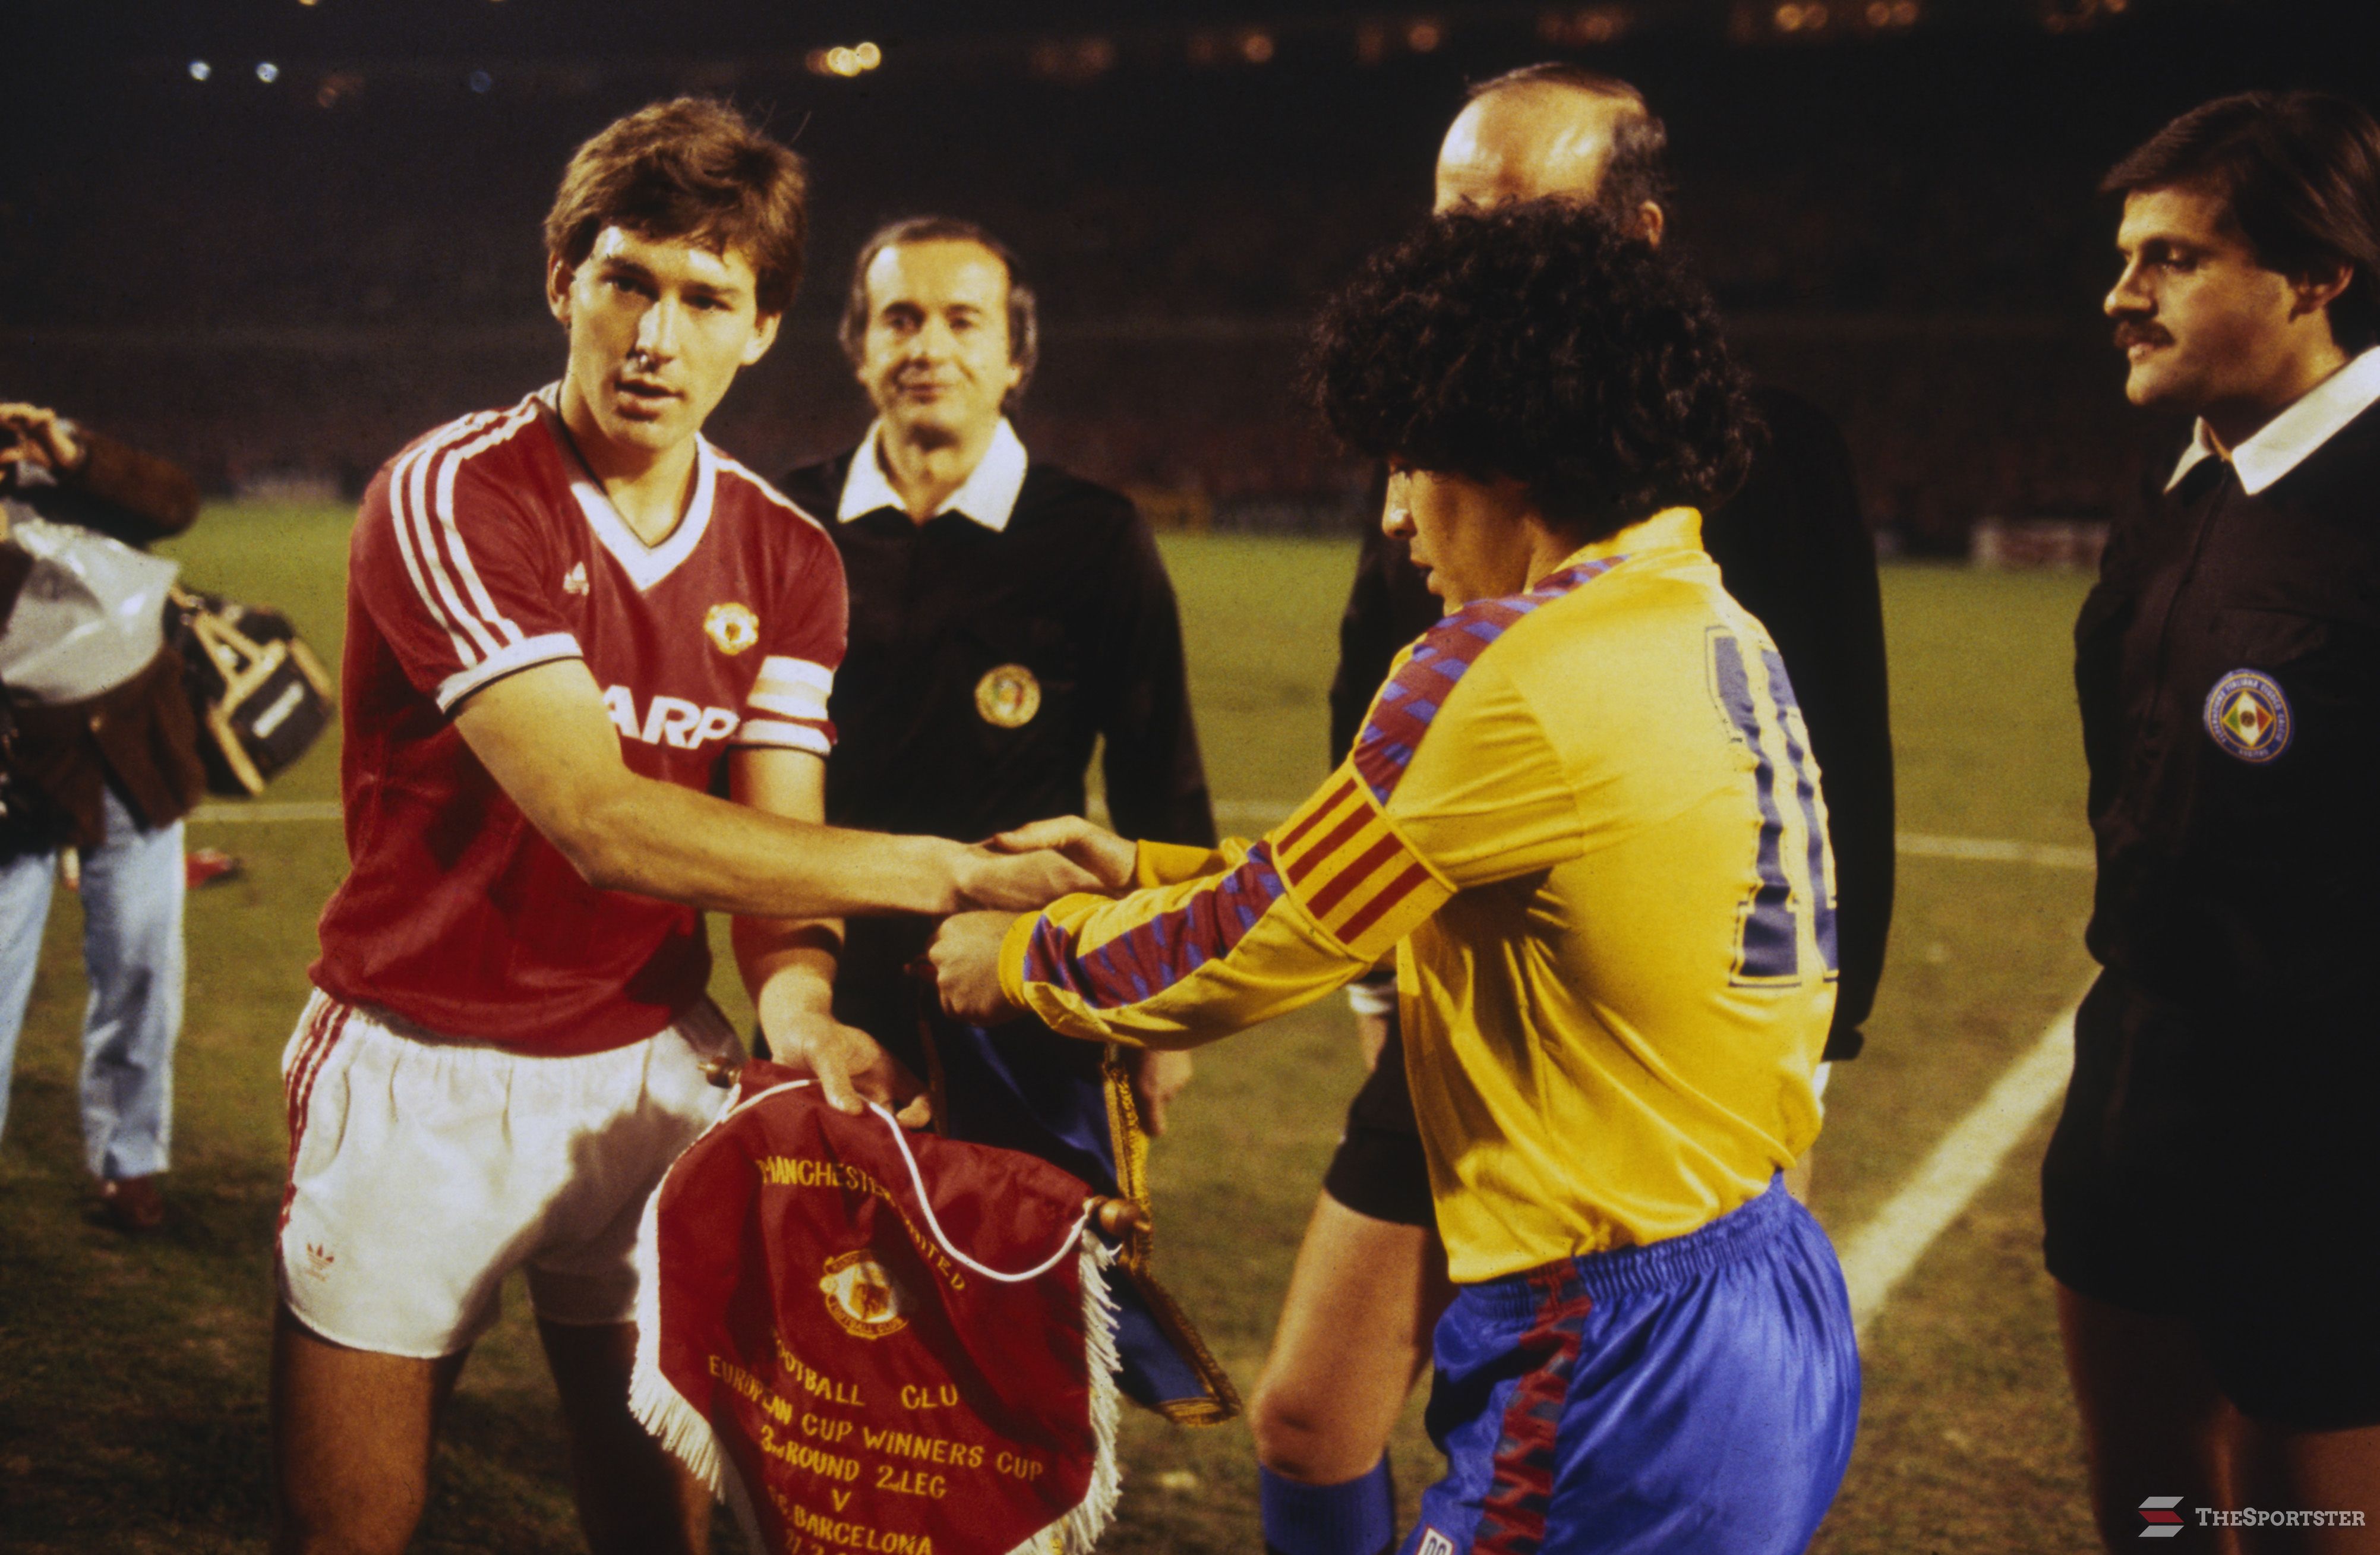 MANCHESTER - MARCH 21: Captain Bryan Robson (left) of Manchester United shakes hands with Barcelona captain Diego Maradona before the European Cup Winners Cup Quarter-Final Second Leg match between Manchester United and Barcelona held on March 21, 1984 at Old Trafford, in Manchester, England. Manchester United won the match 3-0, winning the tie 3-2 on aggregate. (Photo by Trevor Jones/Getty Images)